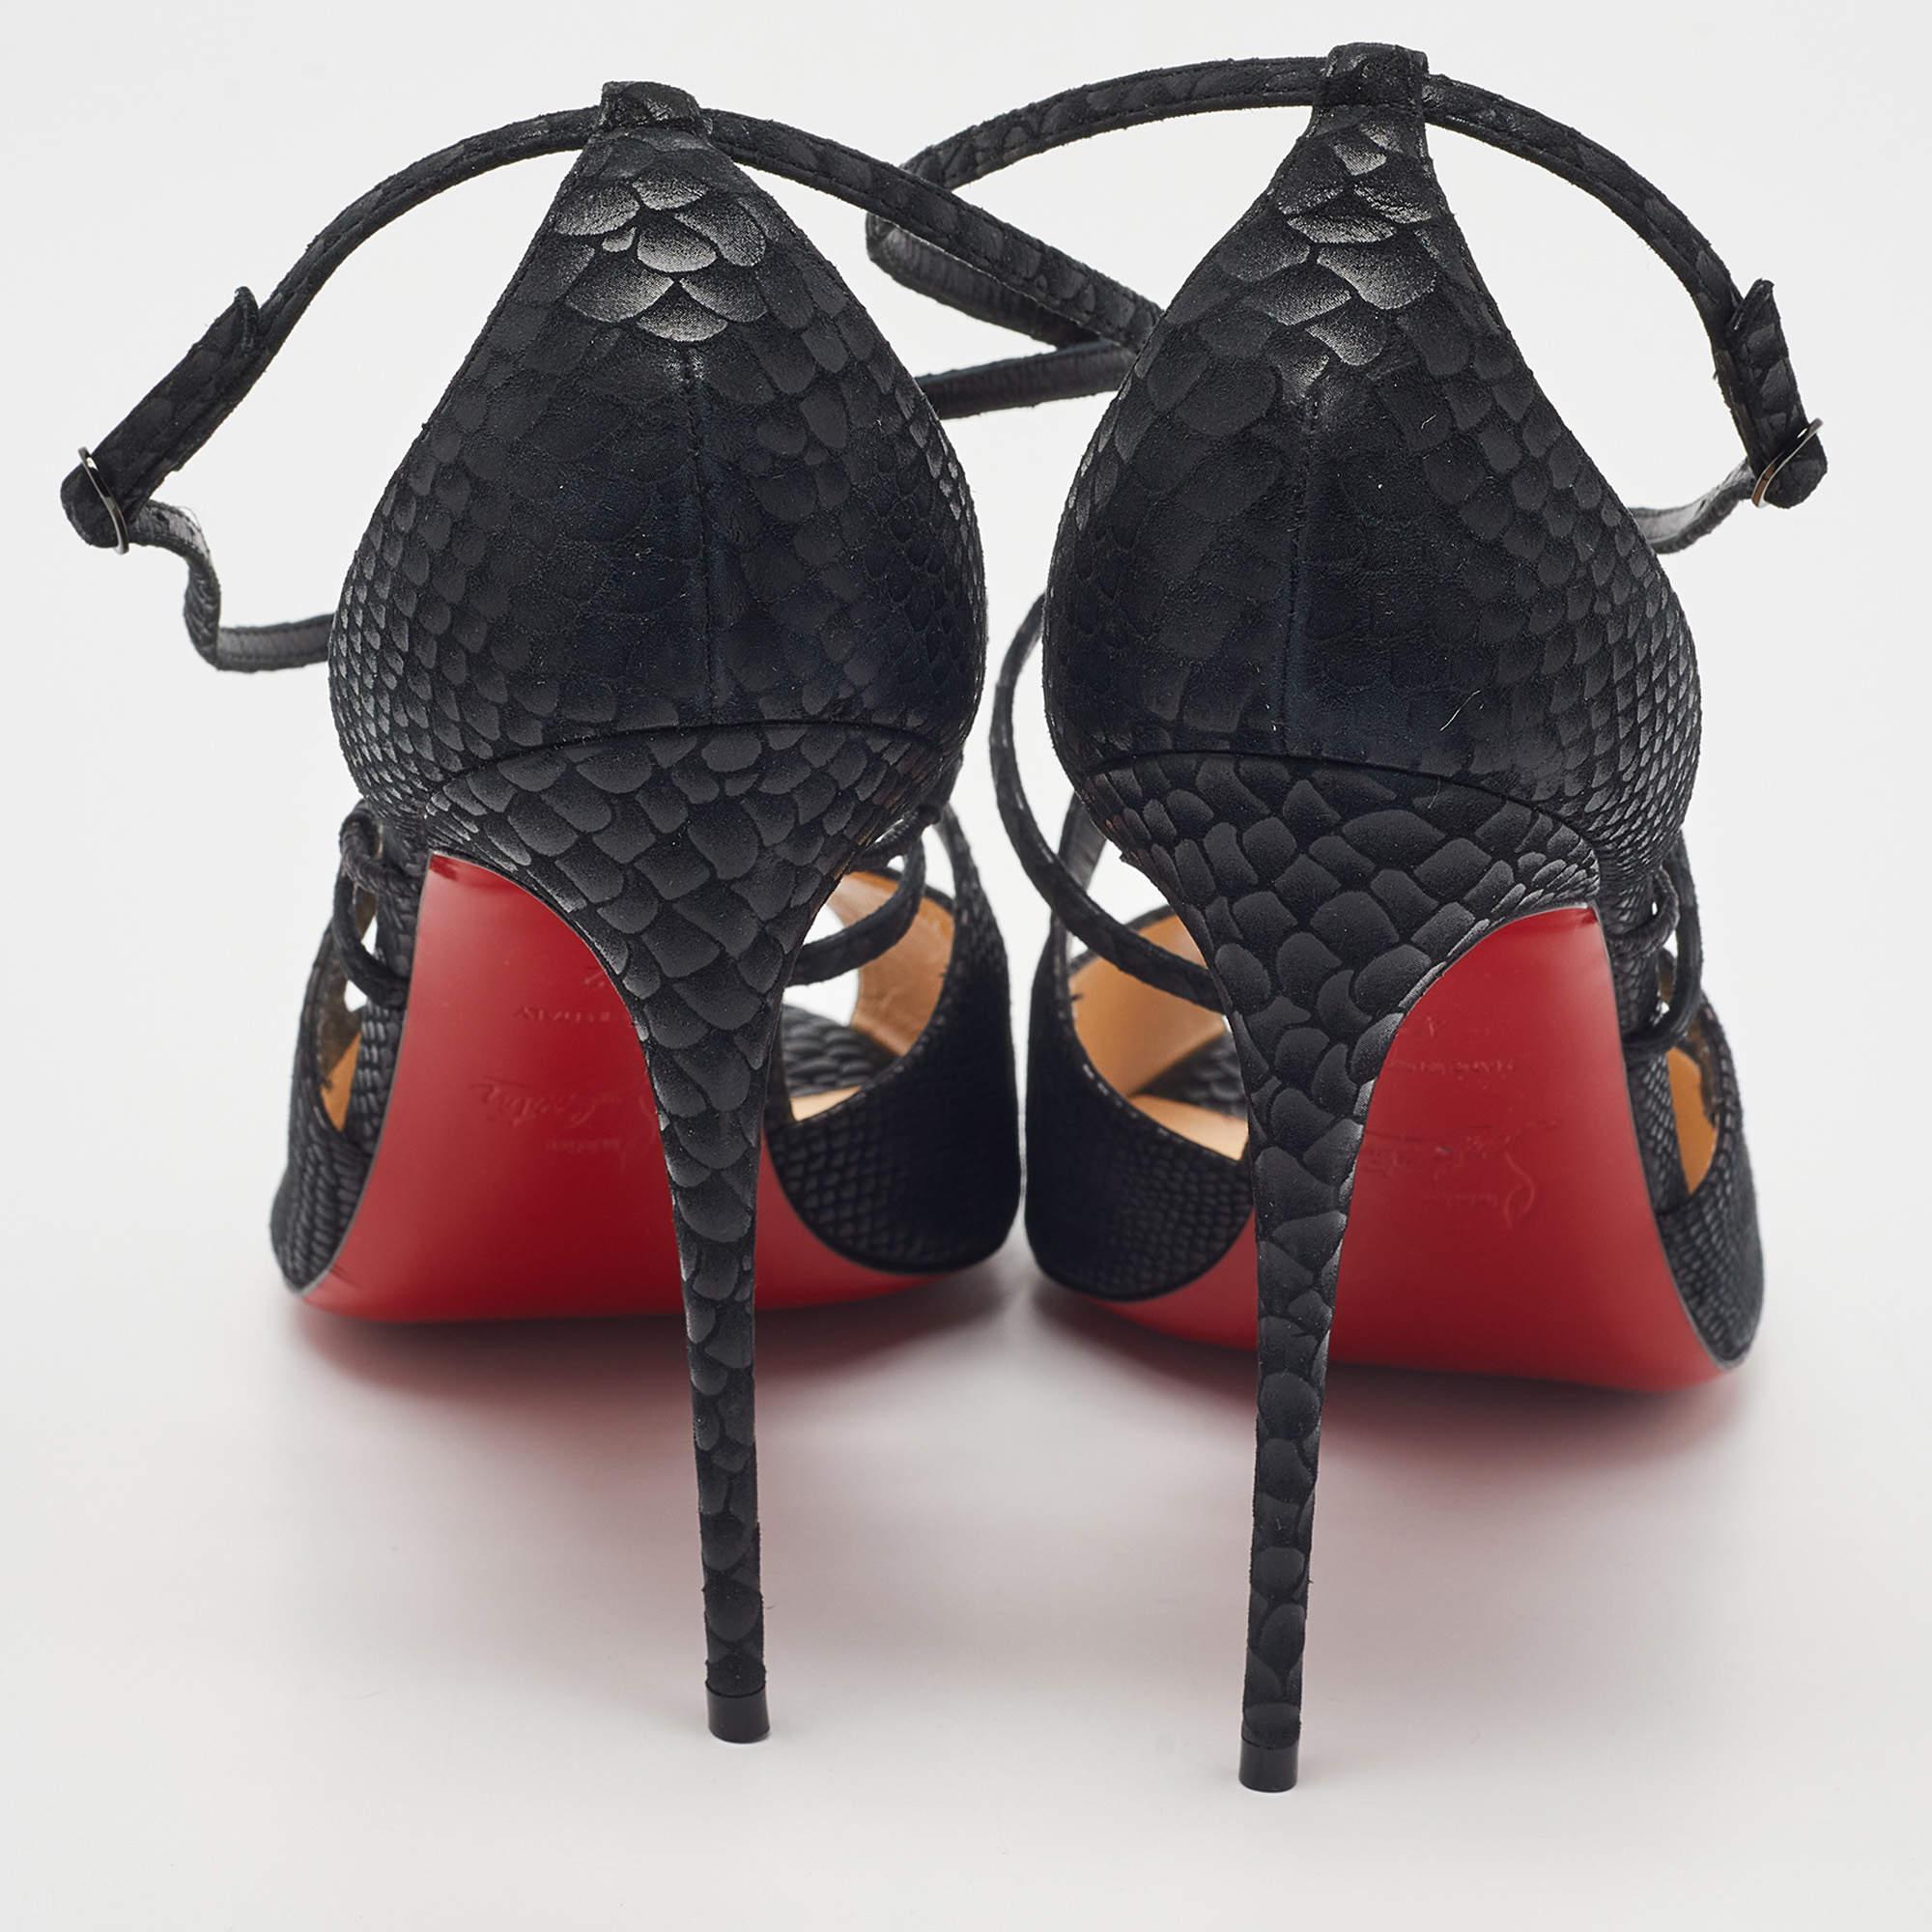 Christian Louboutin Black Embossed Snakeskin Leather Strappy Sandals Size 42 1